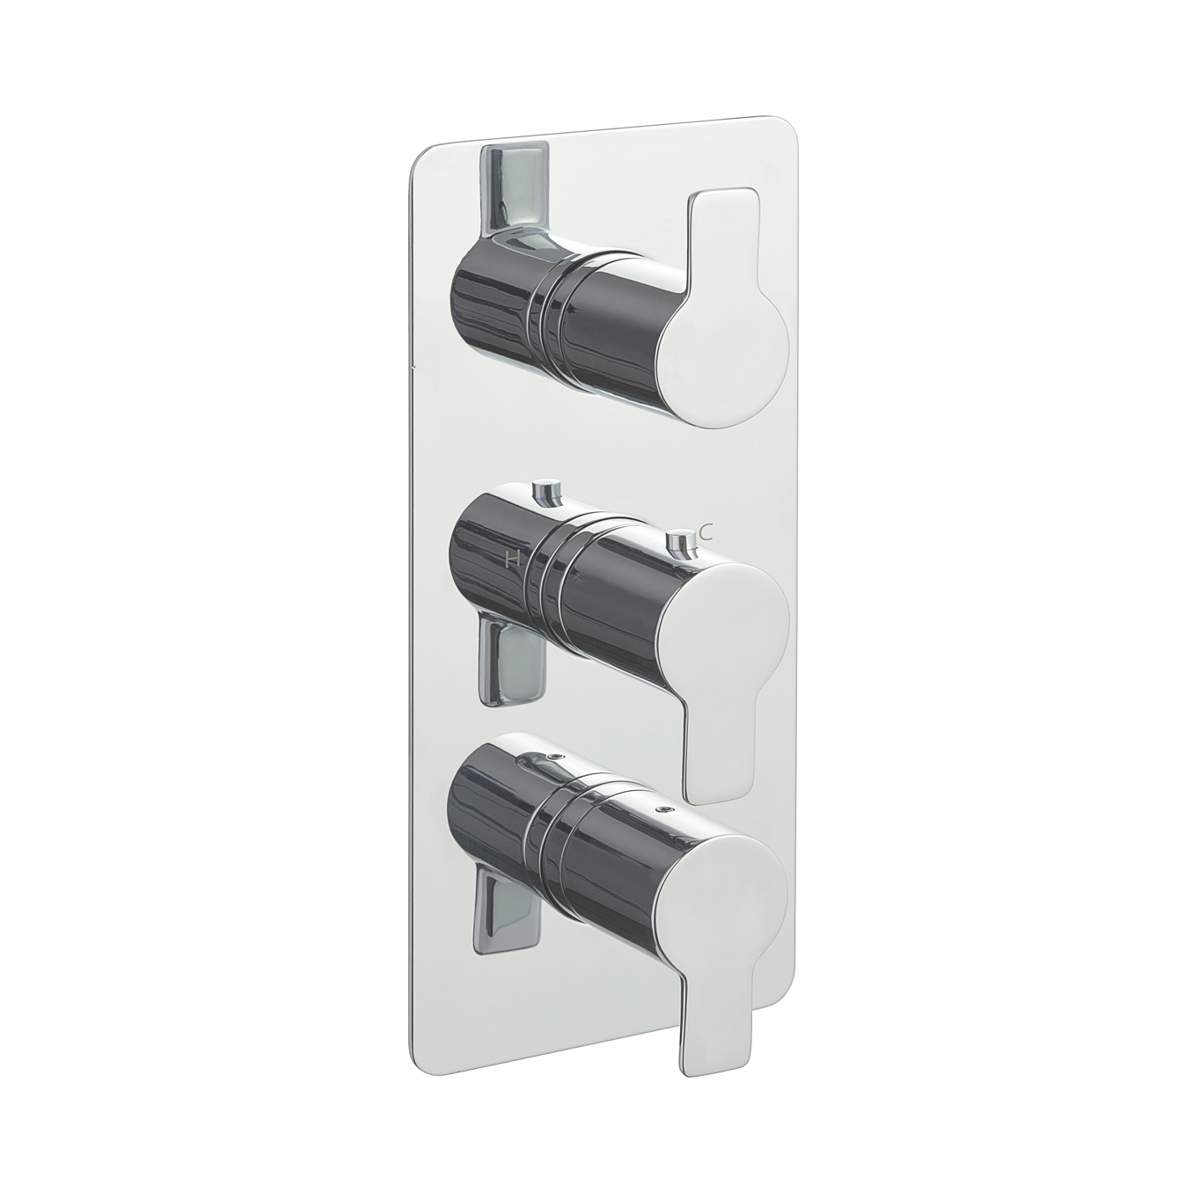 JTP Amore 2 Outlet Thermostat (79690)